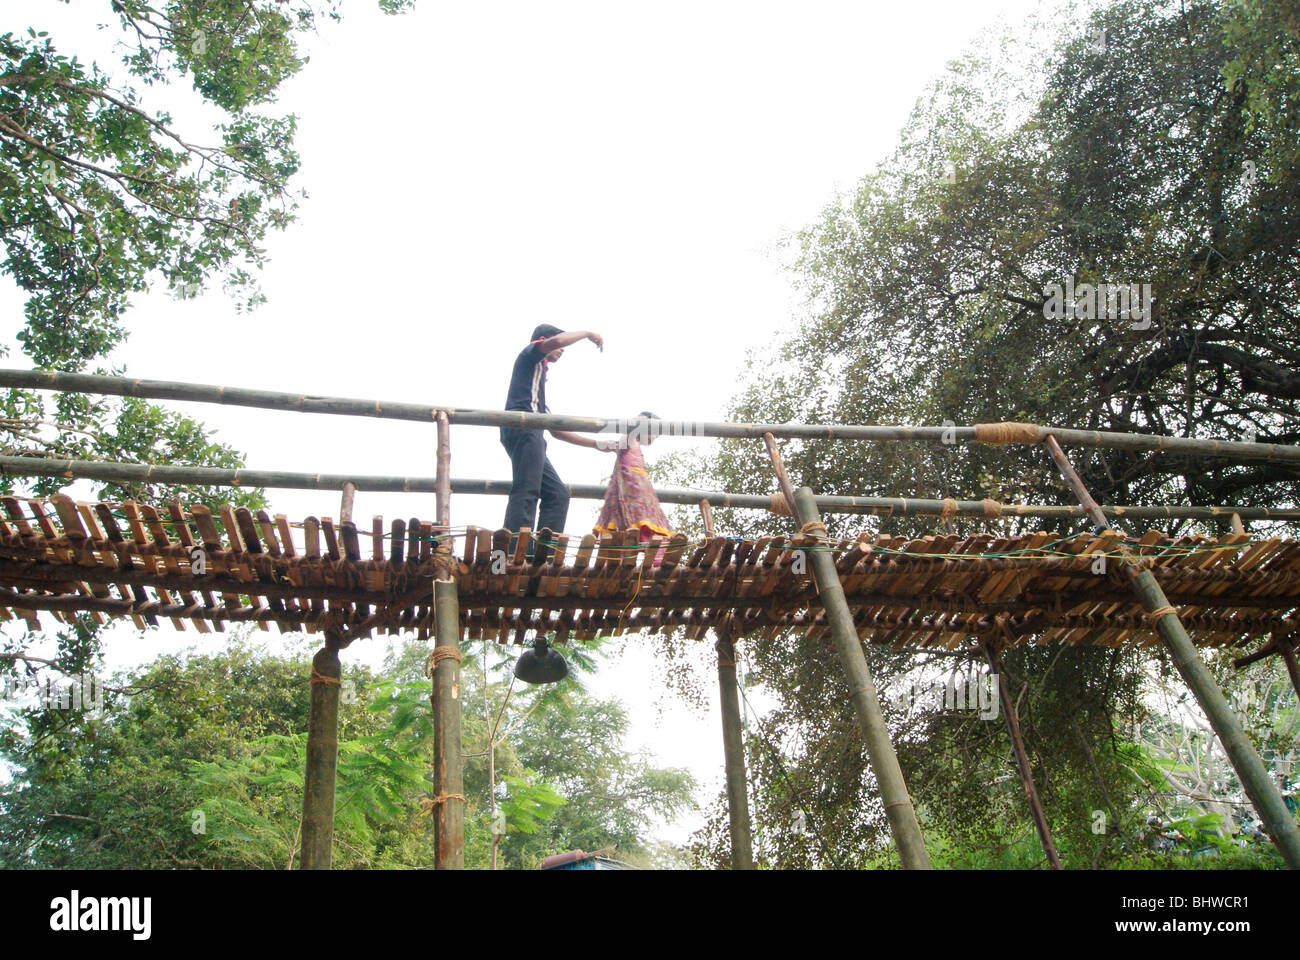 Brother helping small sister for Walking on the Top of Very narrow Bamboo Bridge.Bamboo Bridge Scene from Kerala,India Stock Photo